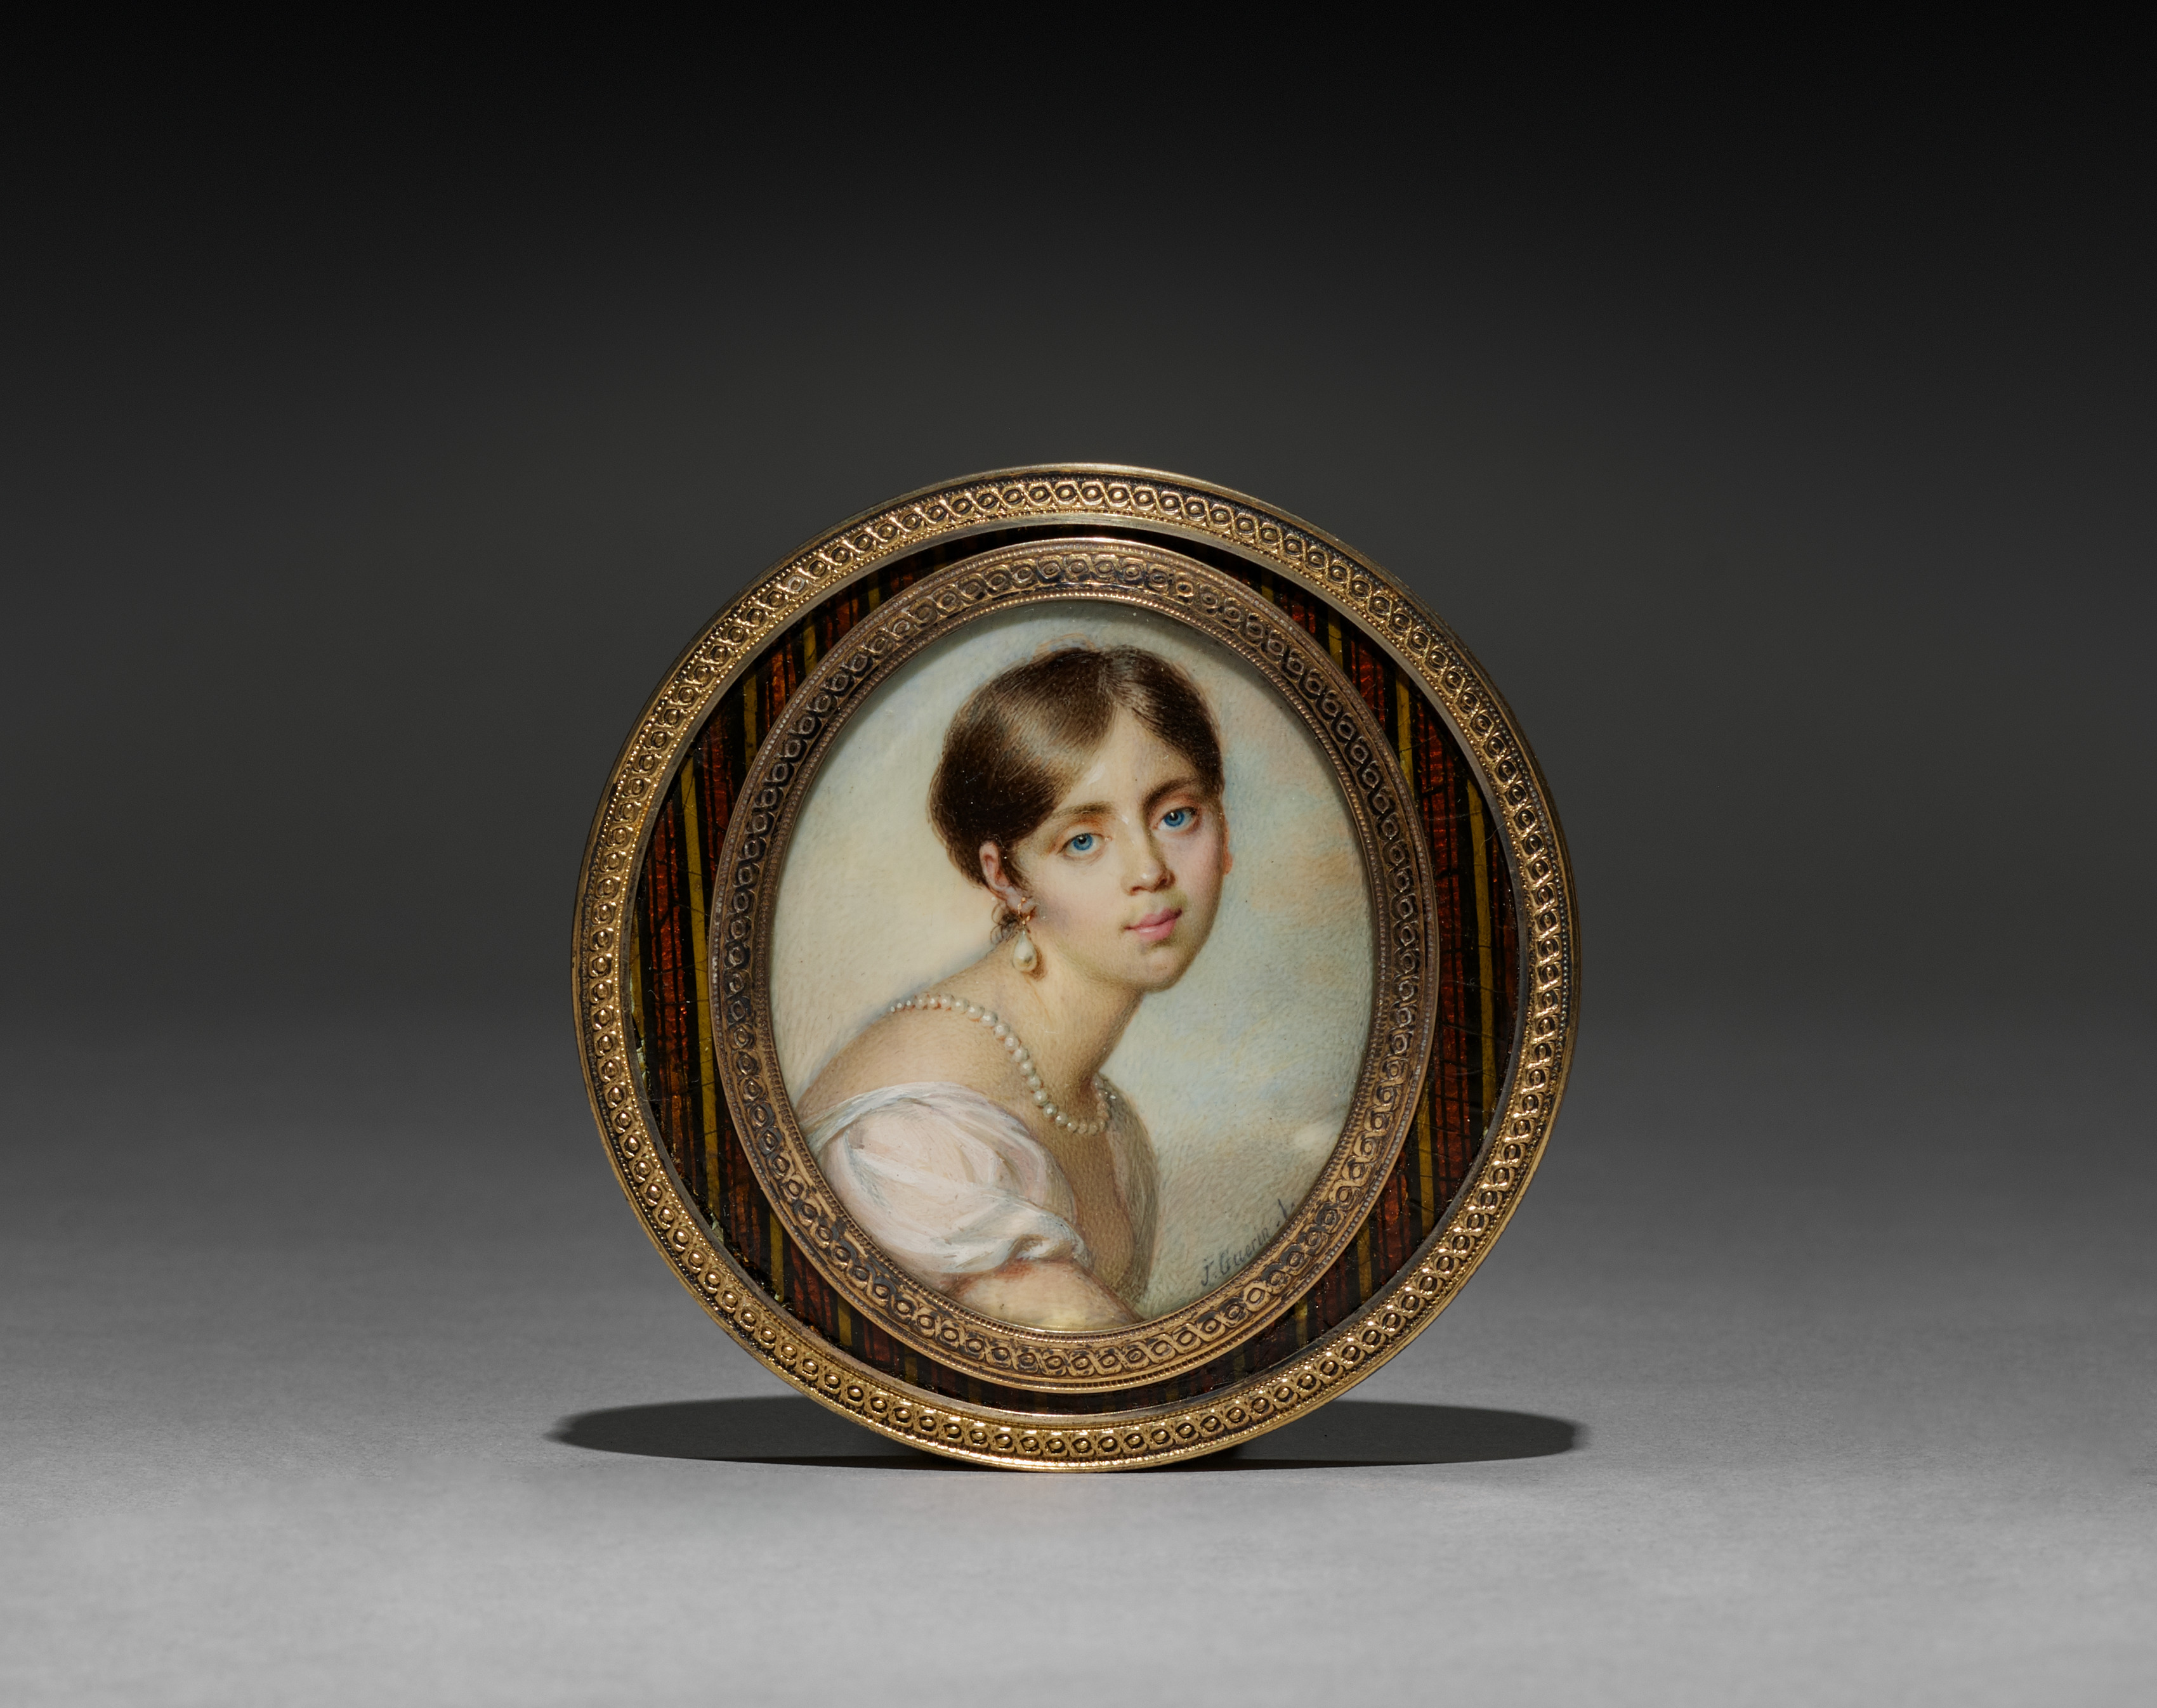 Cover for a Snuff Box with a Portrait of a Young Woman